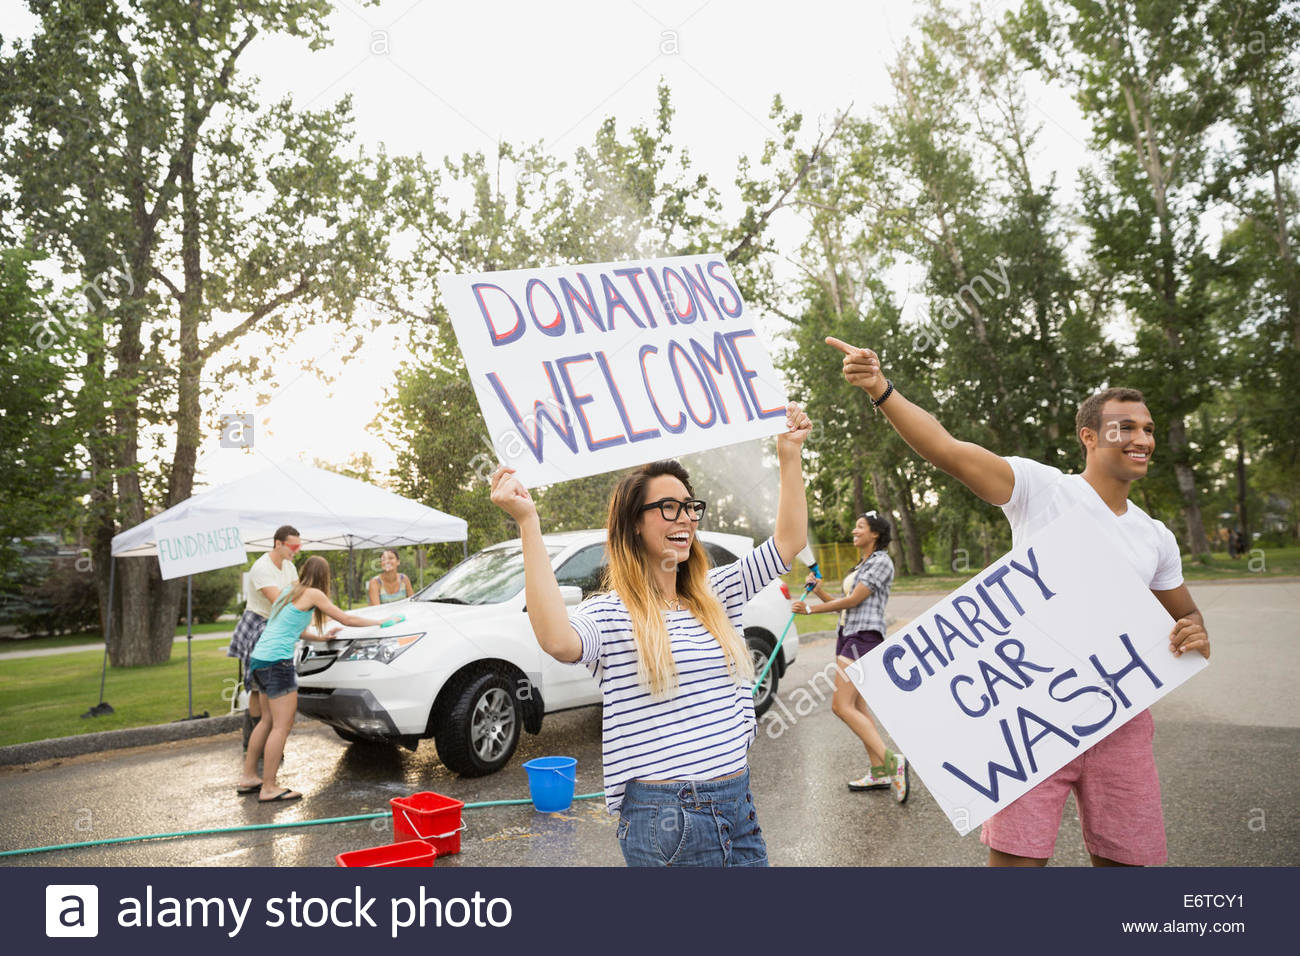 Enthusiastic volunteers waving charity car wash signs Stock Photo